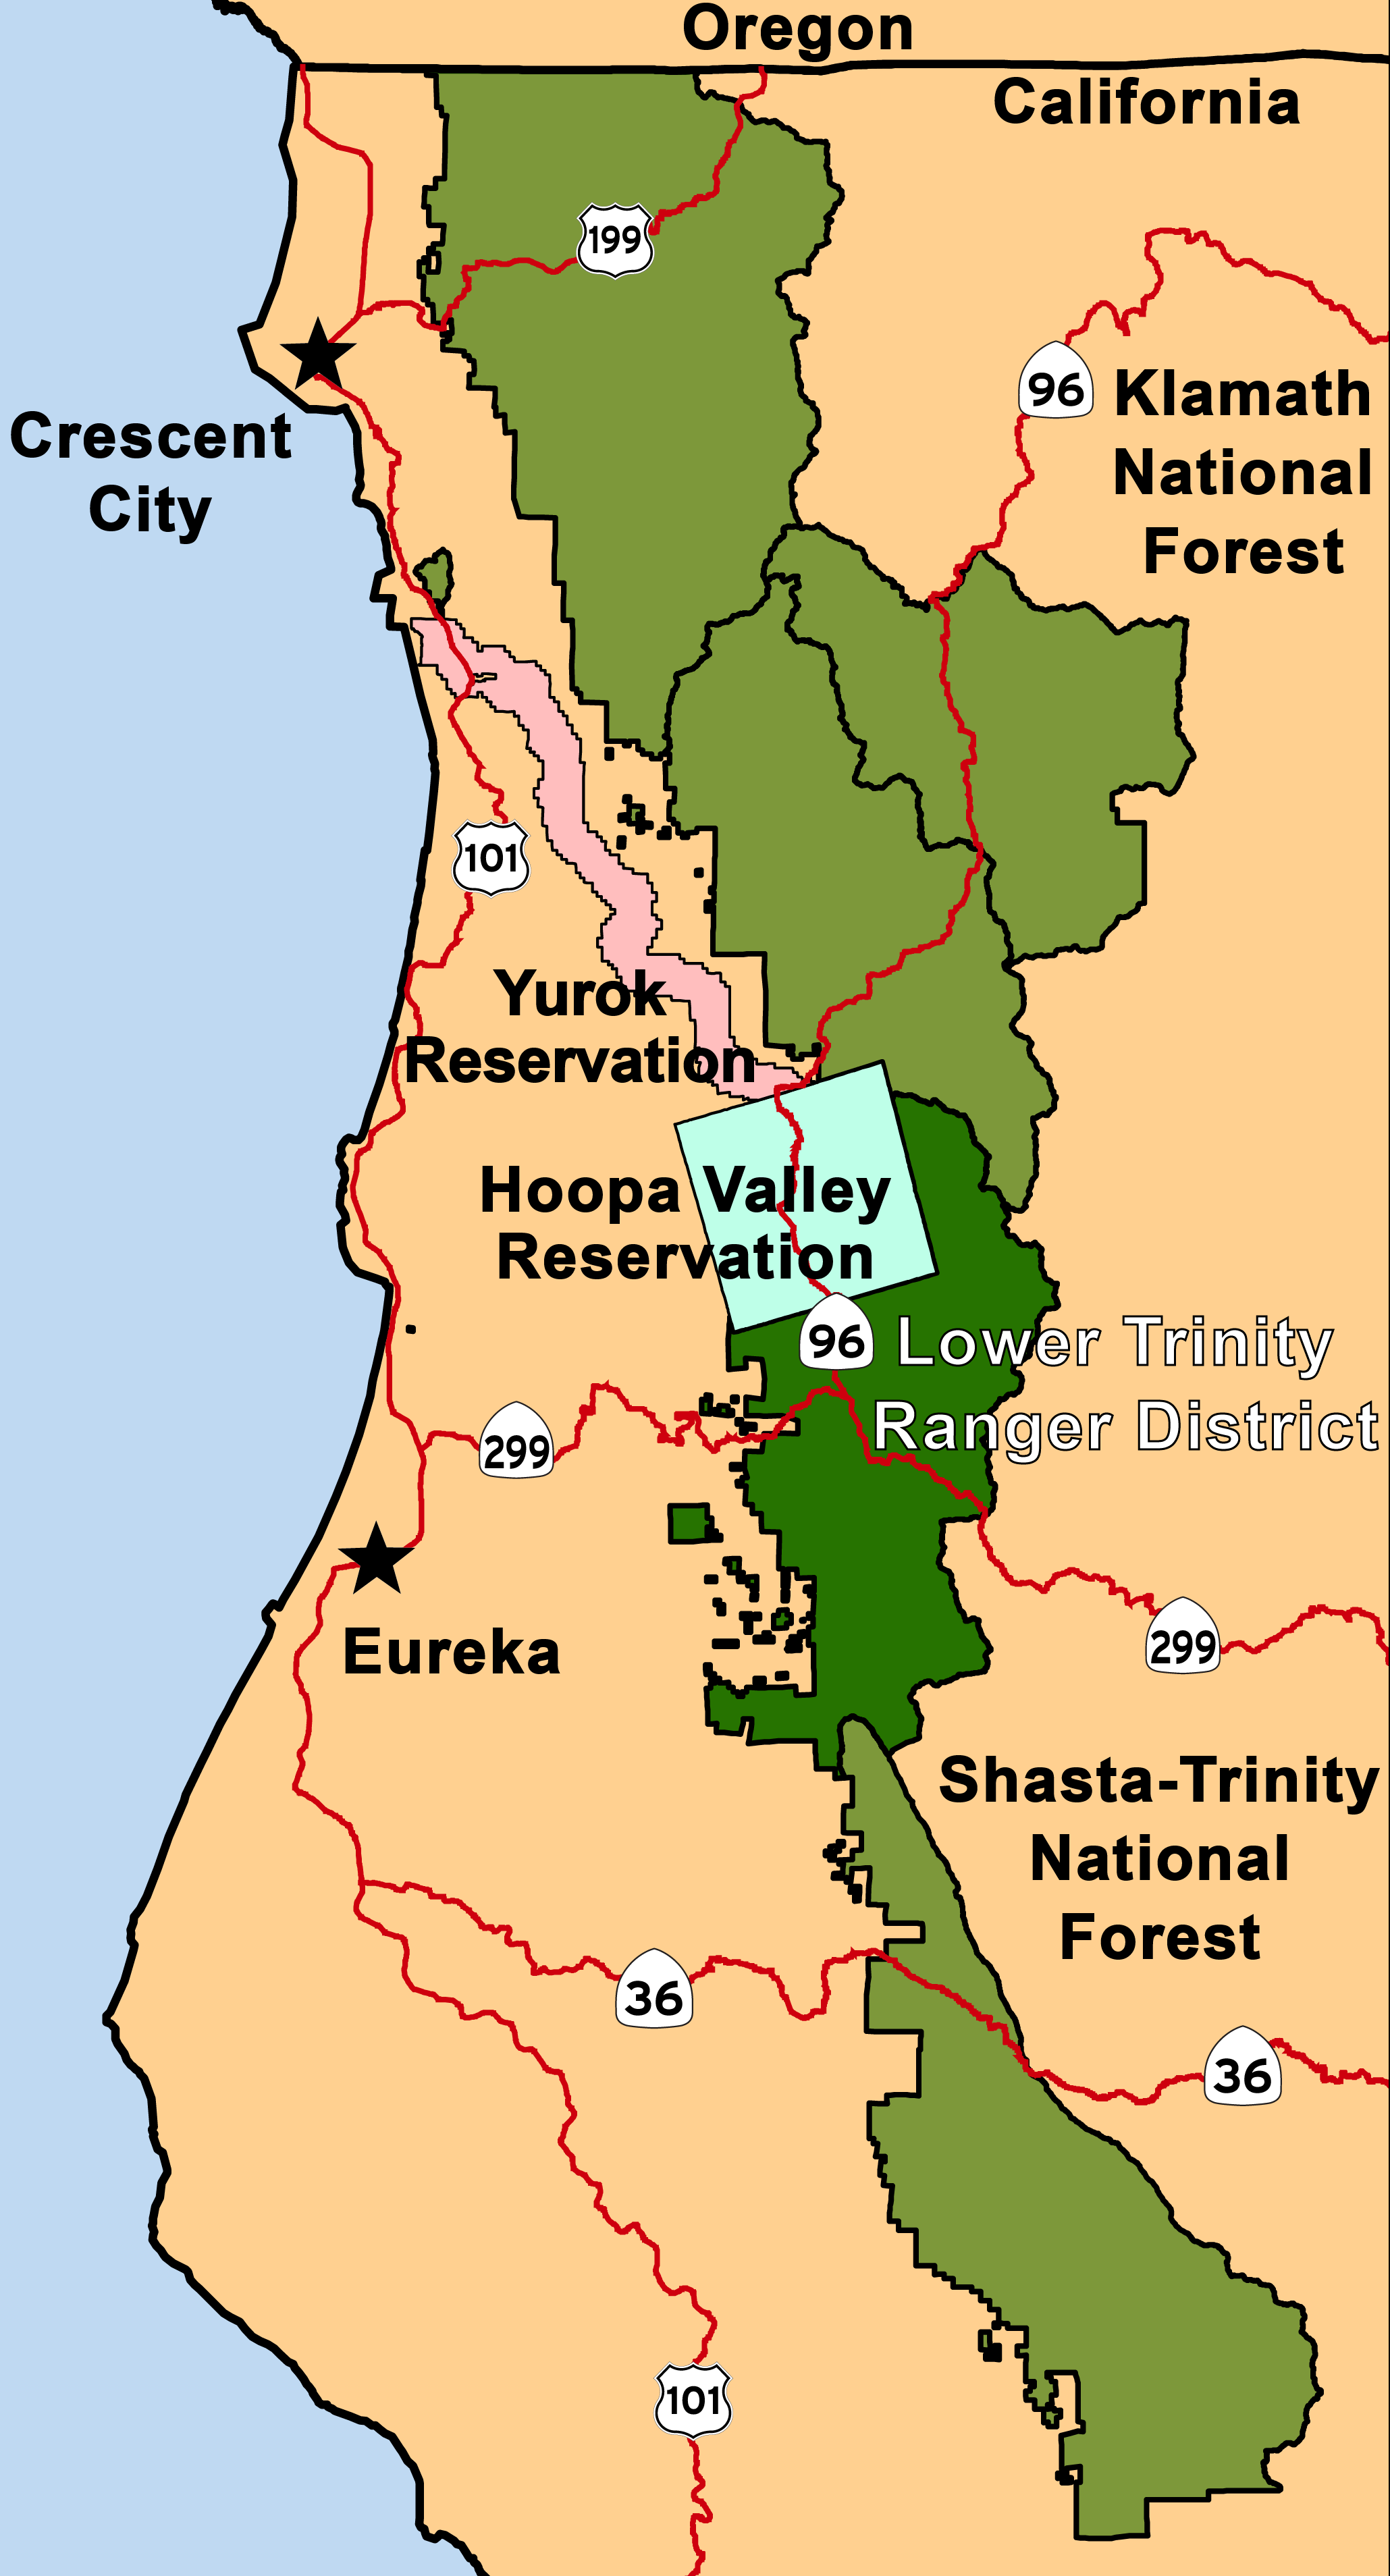 A map of the Six Rivers National Forest highlighting the Lower Trinity Ranger District